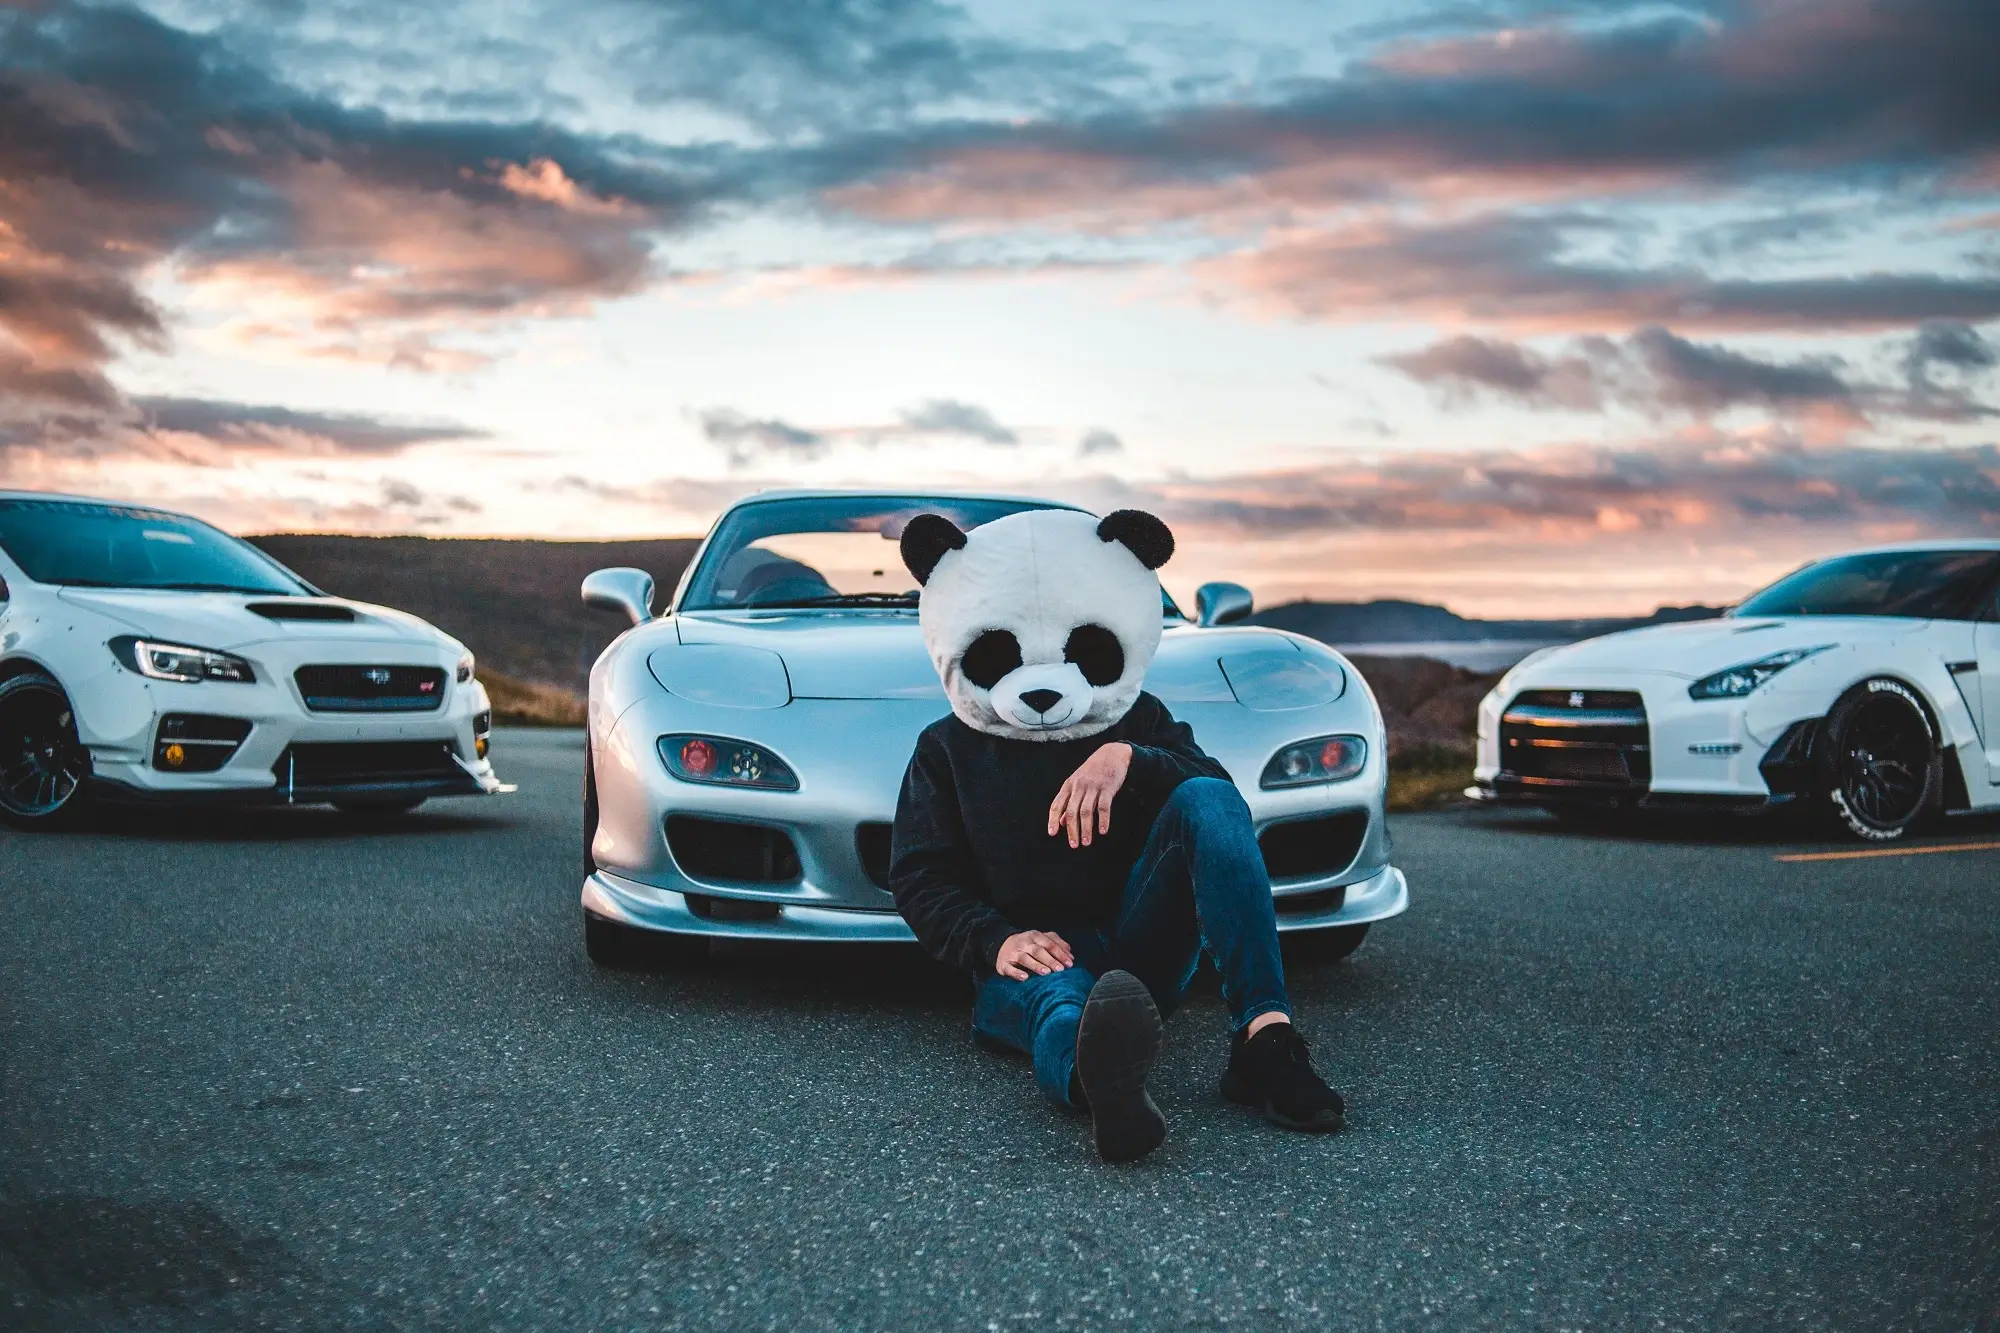 A man wearing a panda headpiece while sitting against a roadster, representing the concept of exempt fringe benefits.